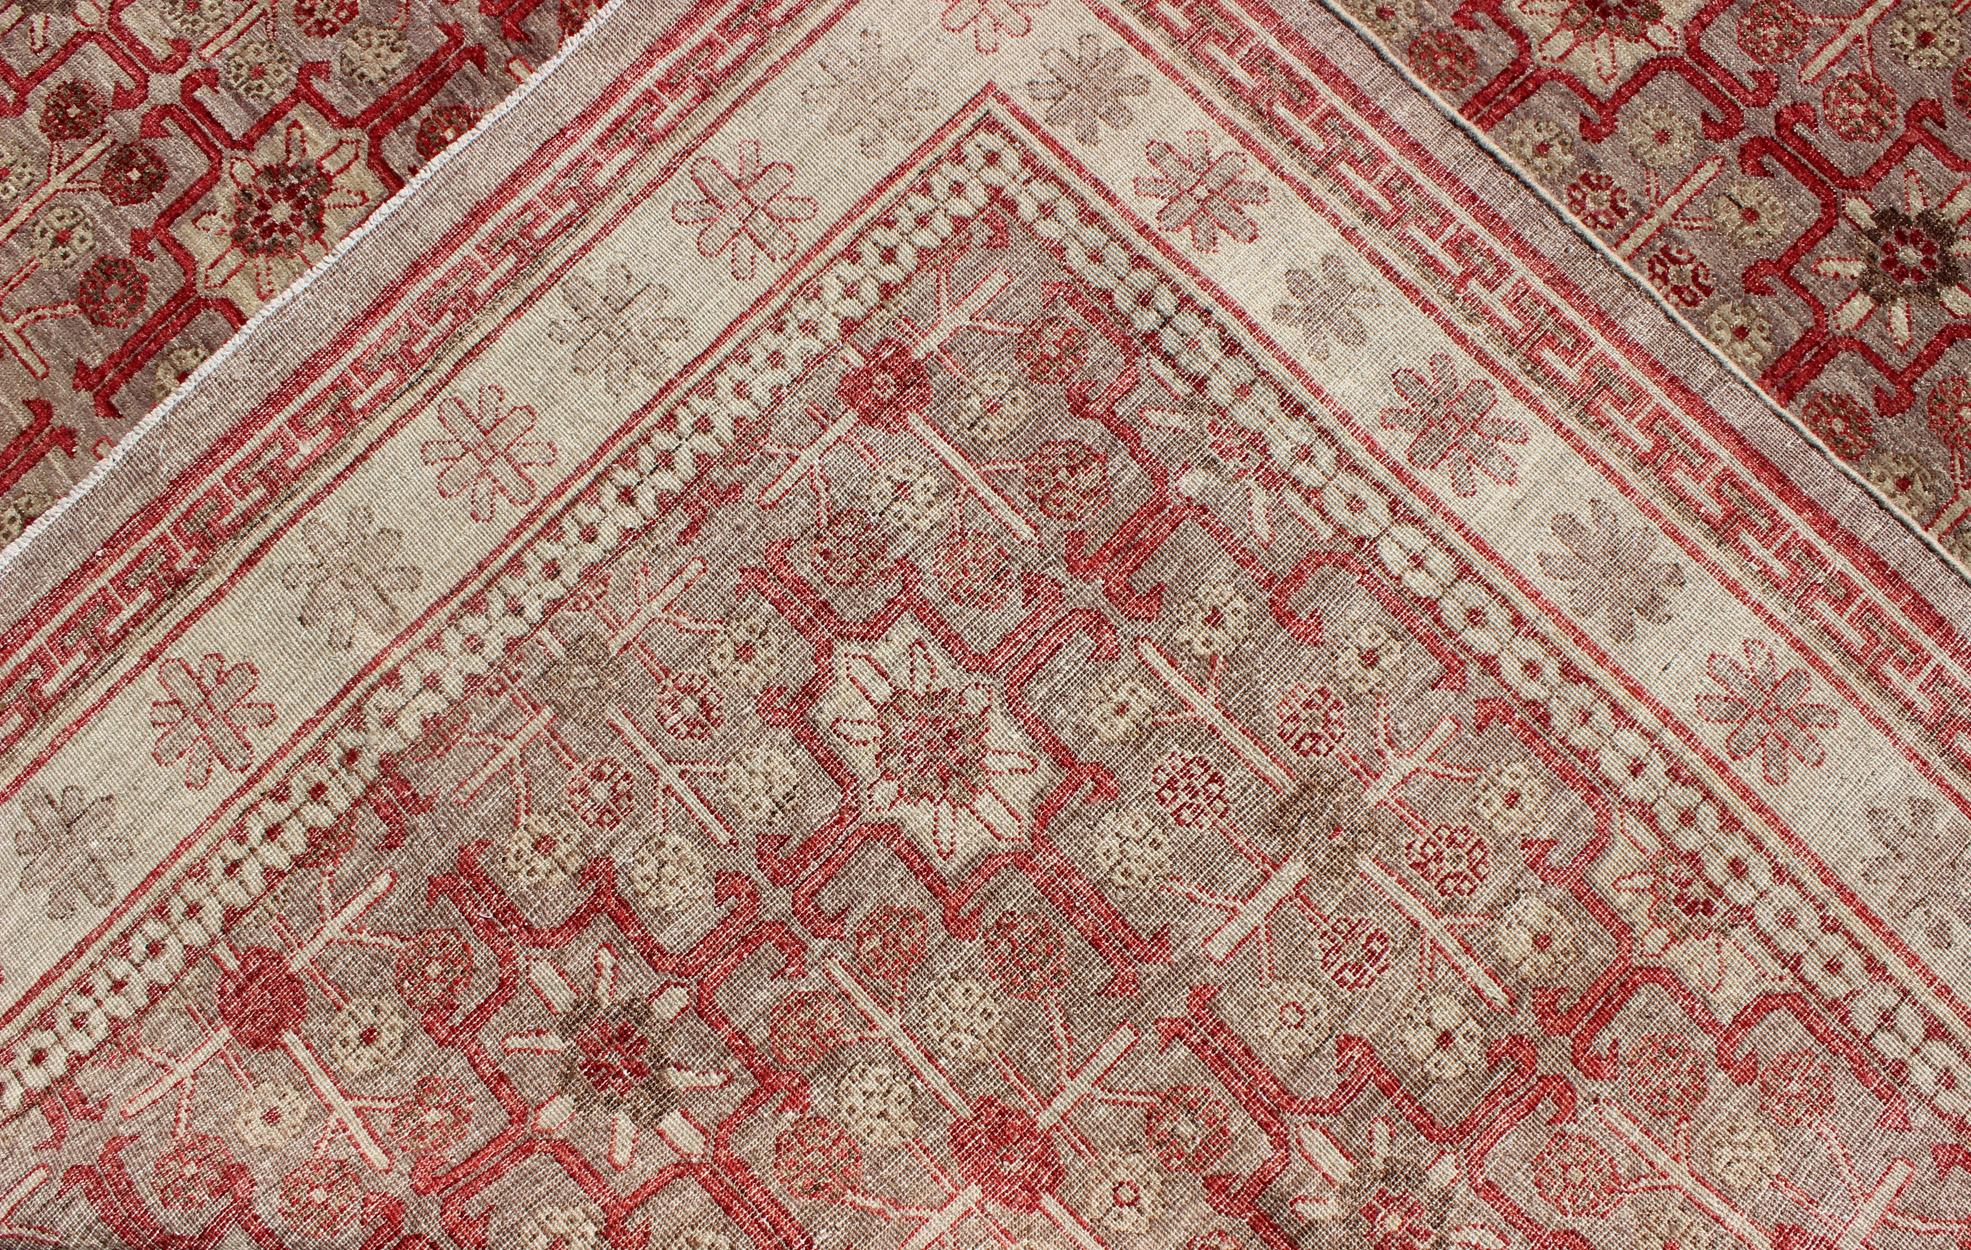 Wool All-Over Khotan Design Rug in Light Gray and Raspberry Background For Sale